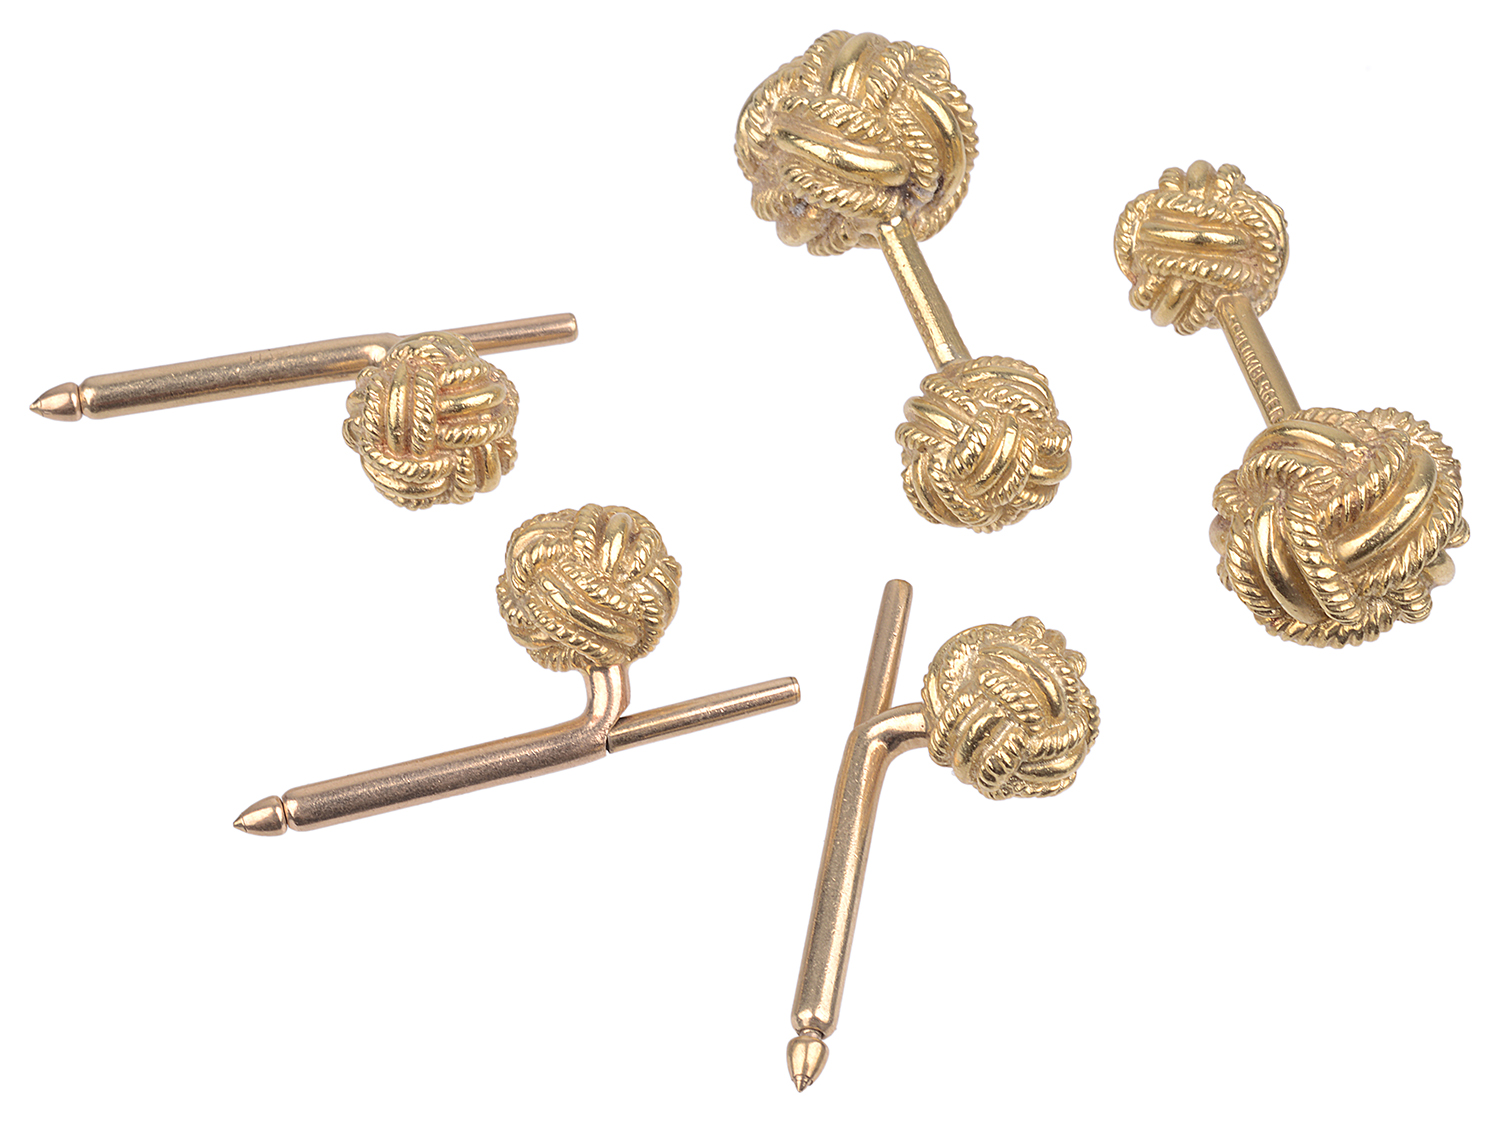 A pair of Tiffany & Co. Schlumberger 18K gold cufflinks and studs(4)